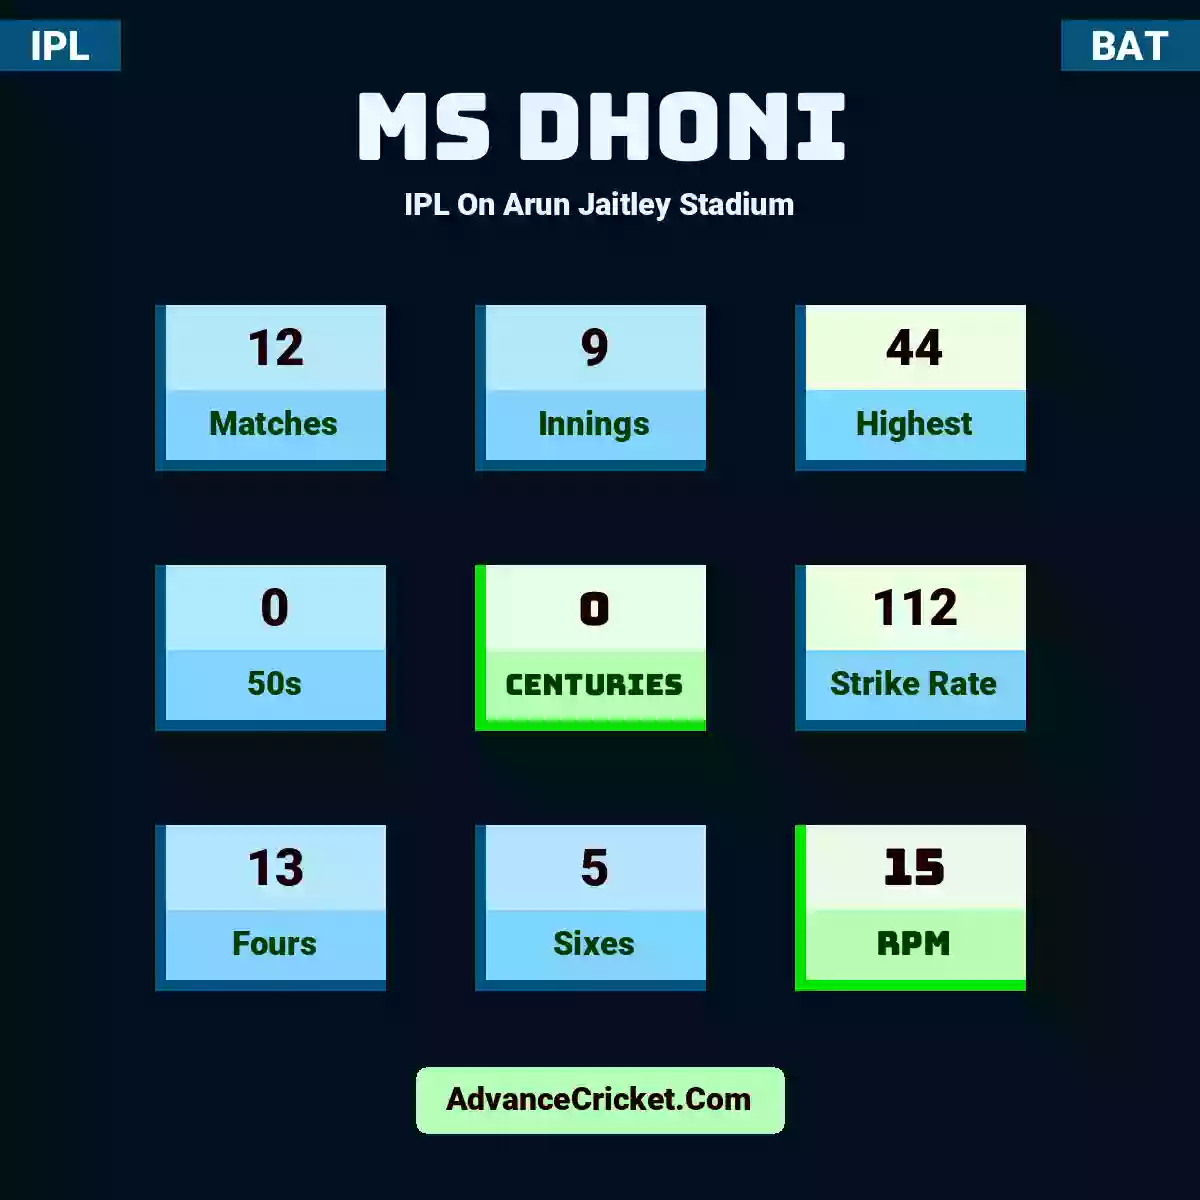 MS Dhoni IPL  On Arun Jaitley Stadium, MS Dhoni played 12 matches, scored 44 runs as highest, 0 half-centuries, and 0 centuries, with a strike rate of 112. M.Dhoni hit 13 fours and 5 sixes, with an RPM of 15.